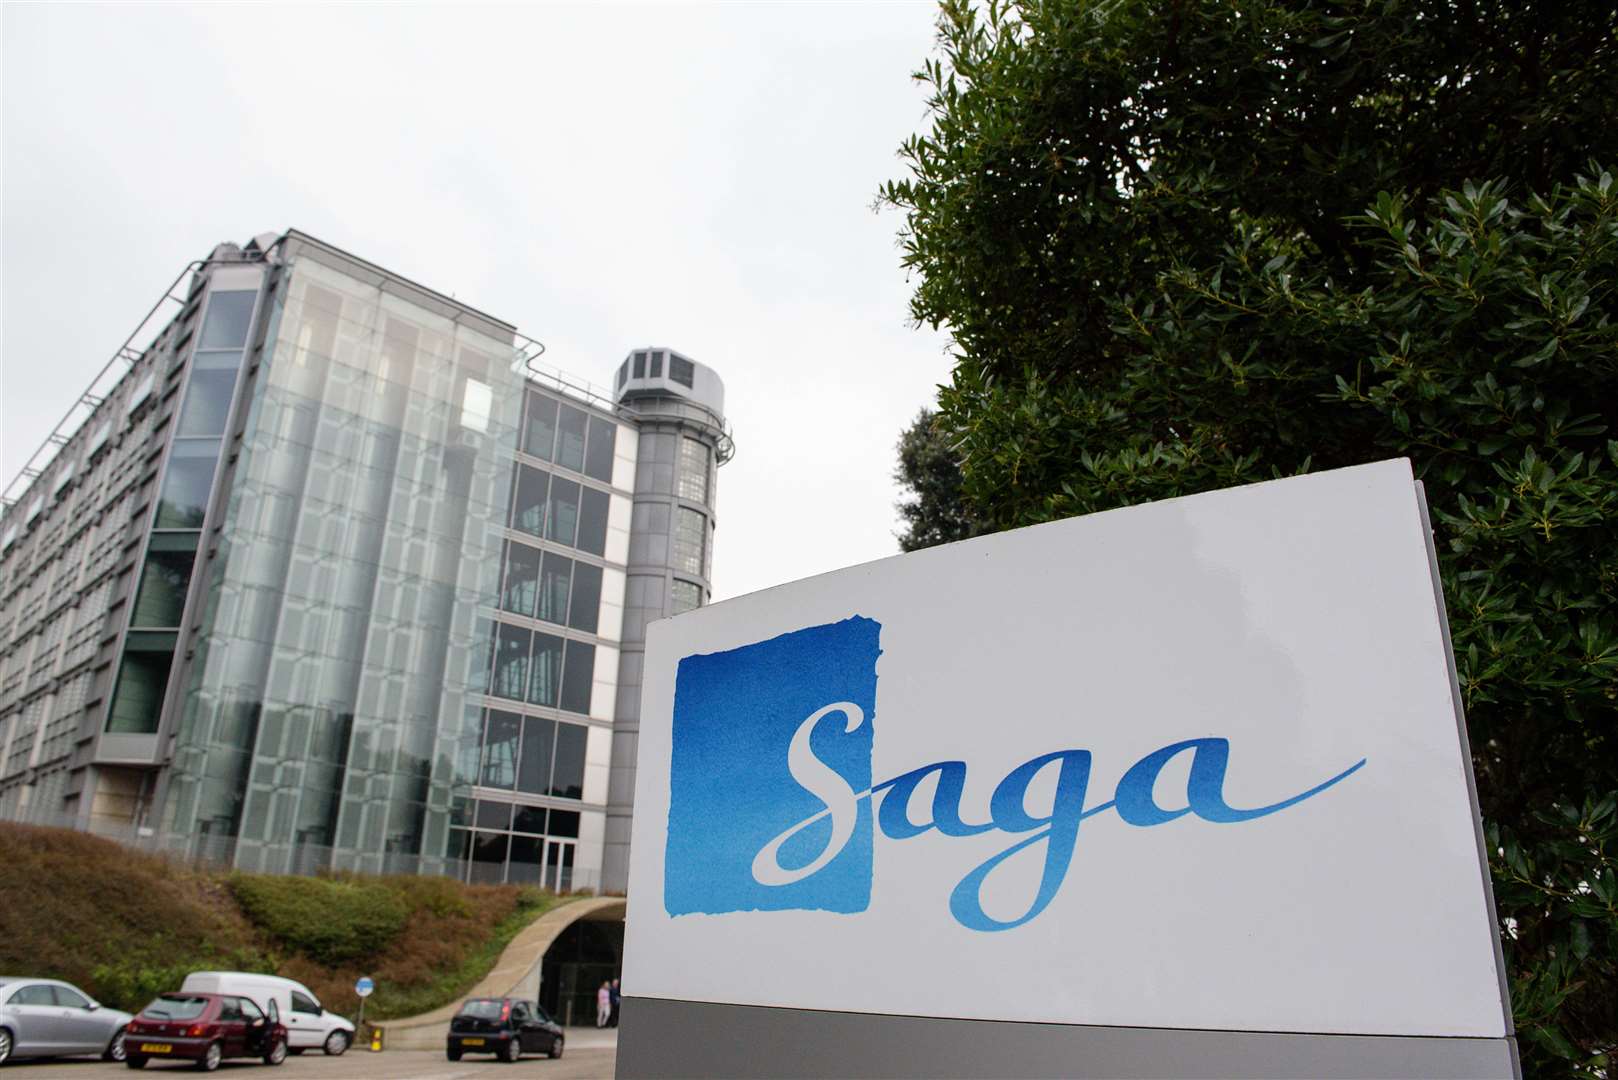 Saga employs some 3,000 staff across its Kent offices